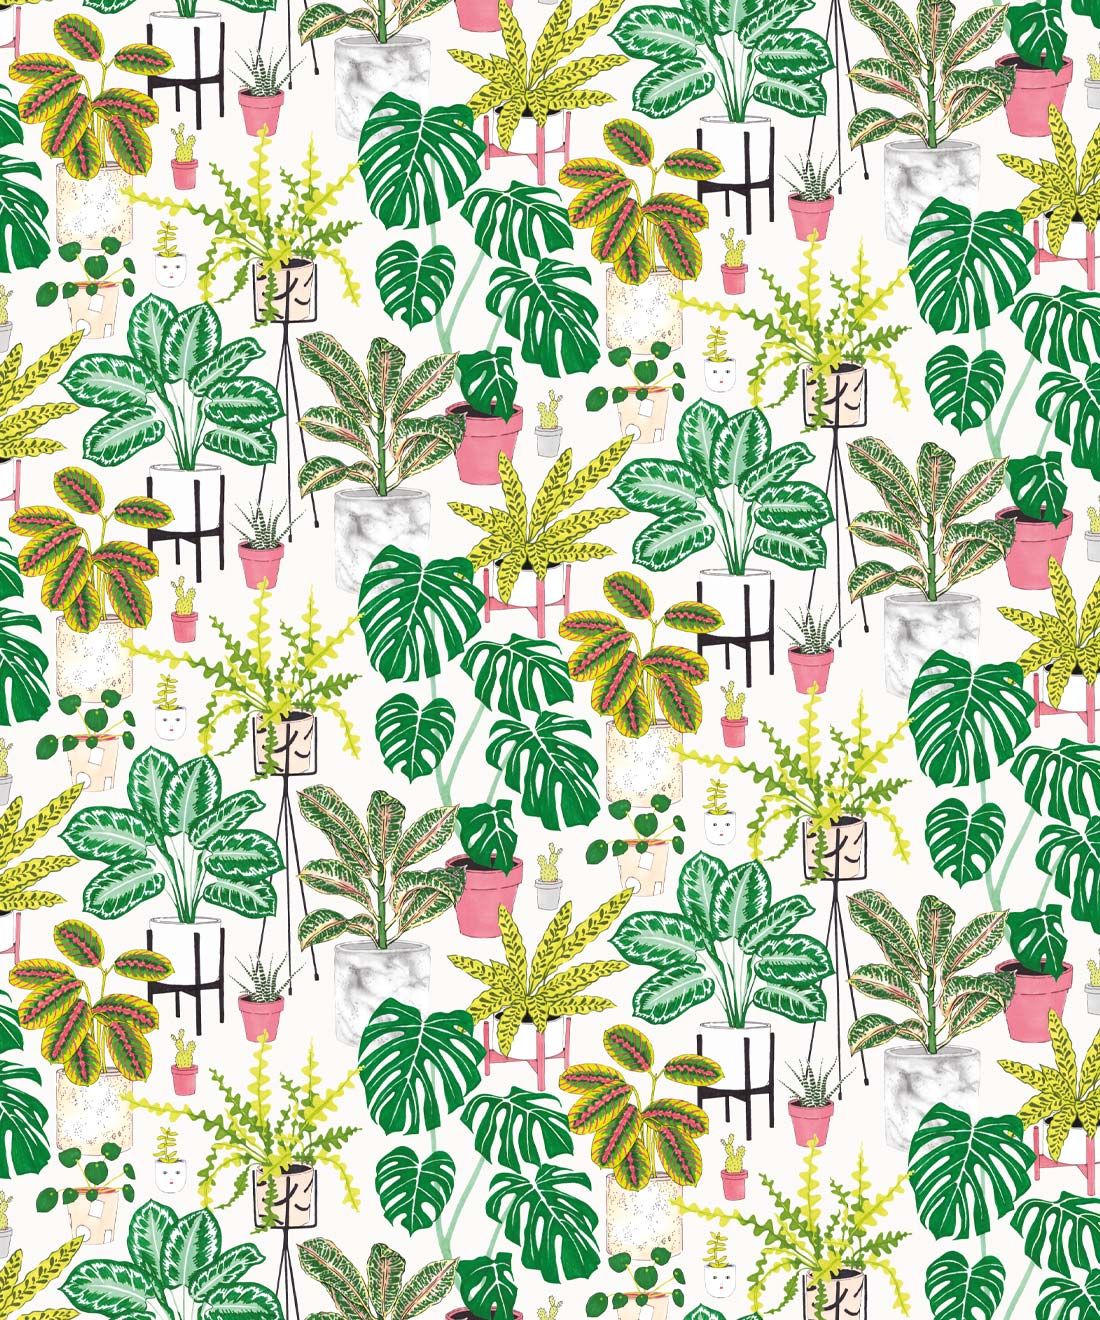 House Plants • Jacqueline Colley • Wallpaper Republic • Green • Swatch